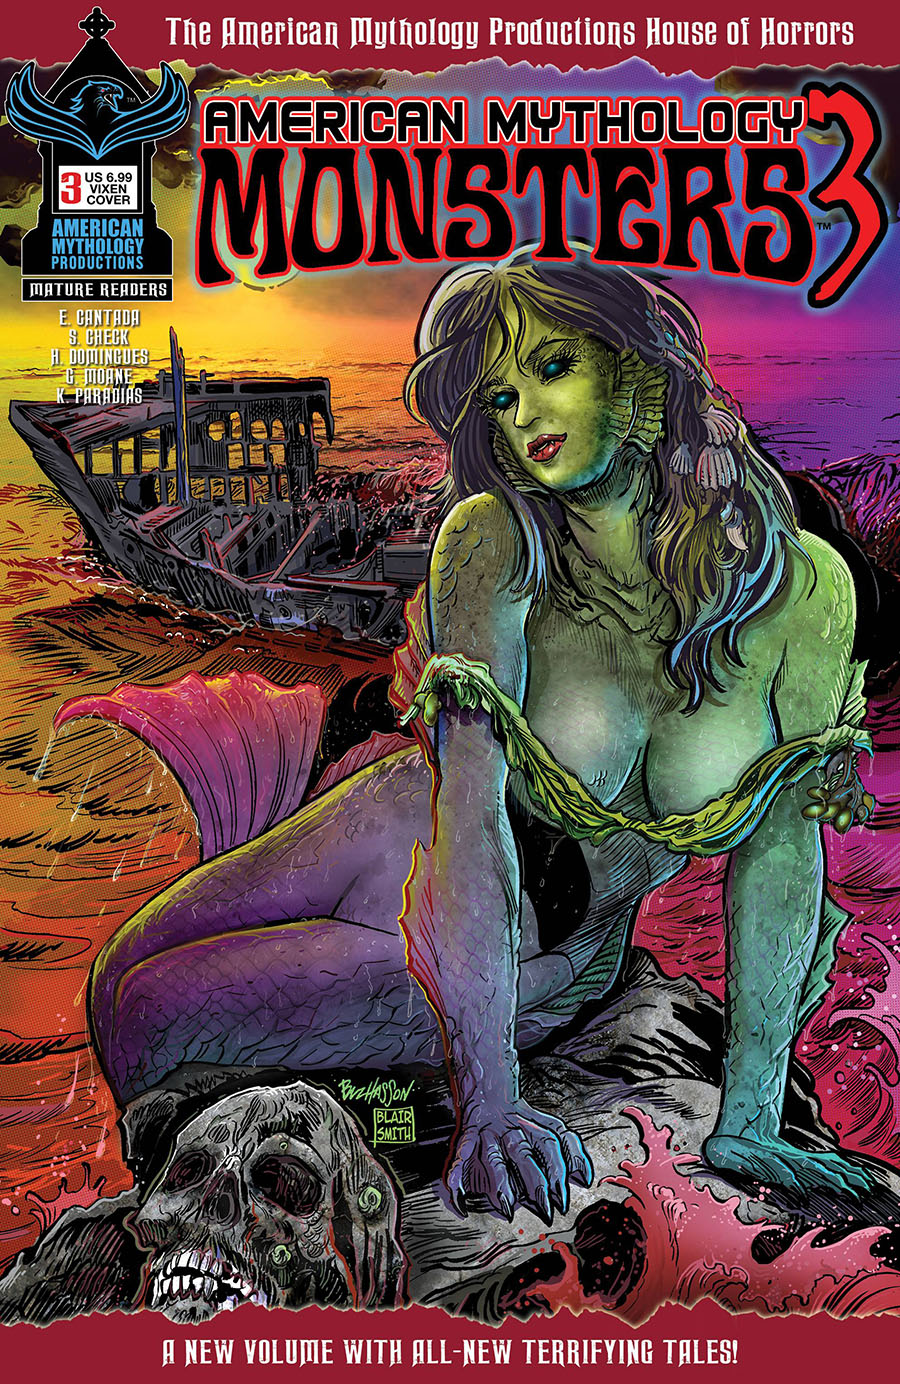 American Mythology Monsters Vol 3 #3 Cover C Variant Buz Hasson Mermaid Vixen Cover